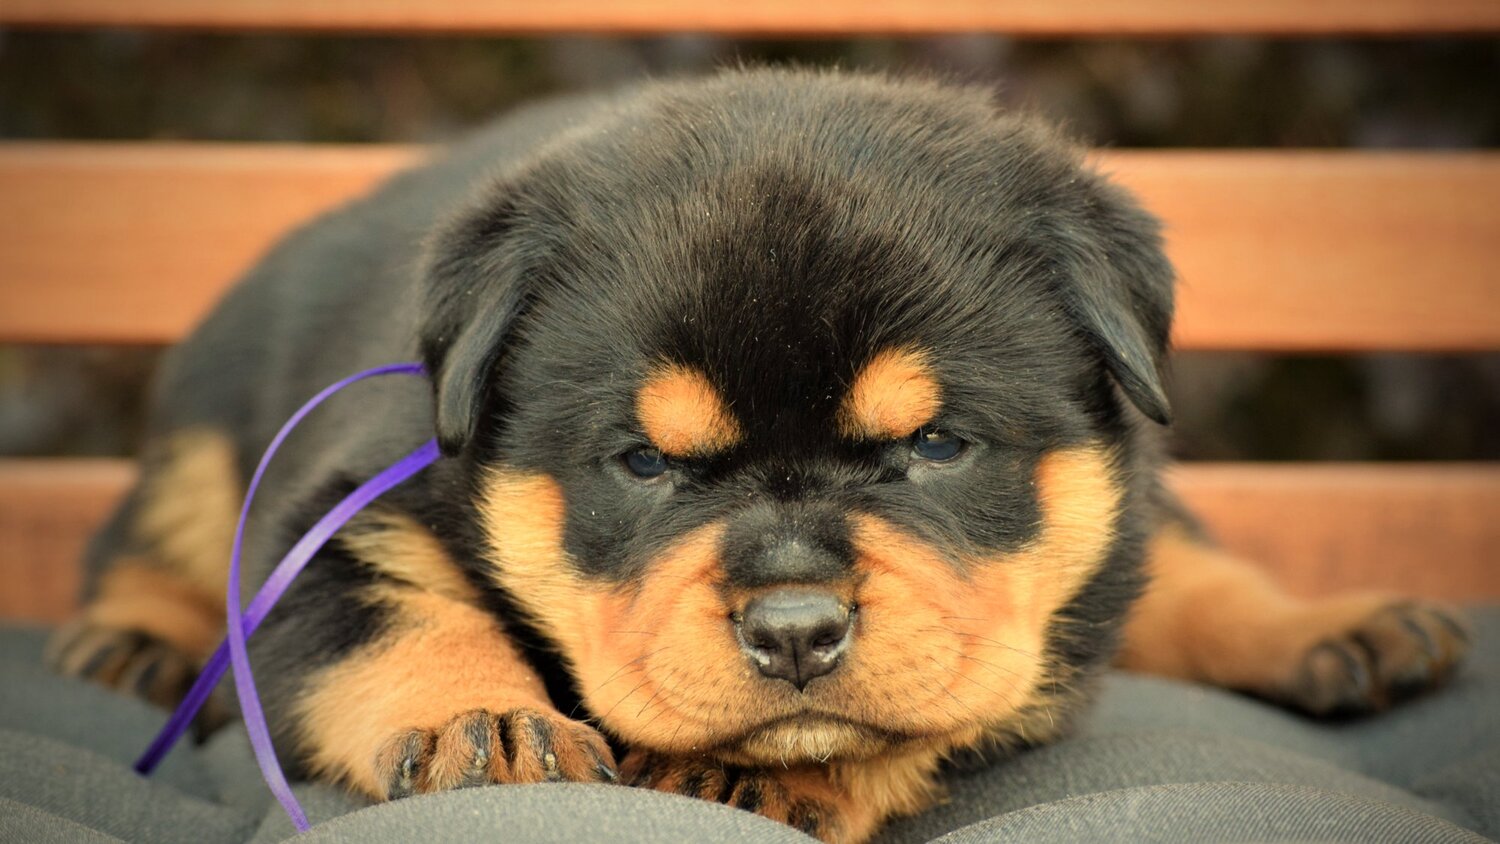 1. Rottweiler Puppies for Sale Near Me on Craigslist - wide 9